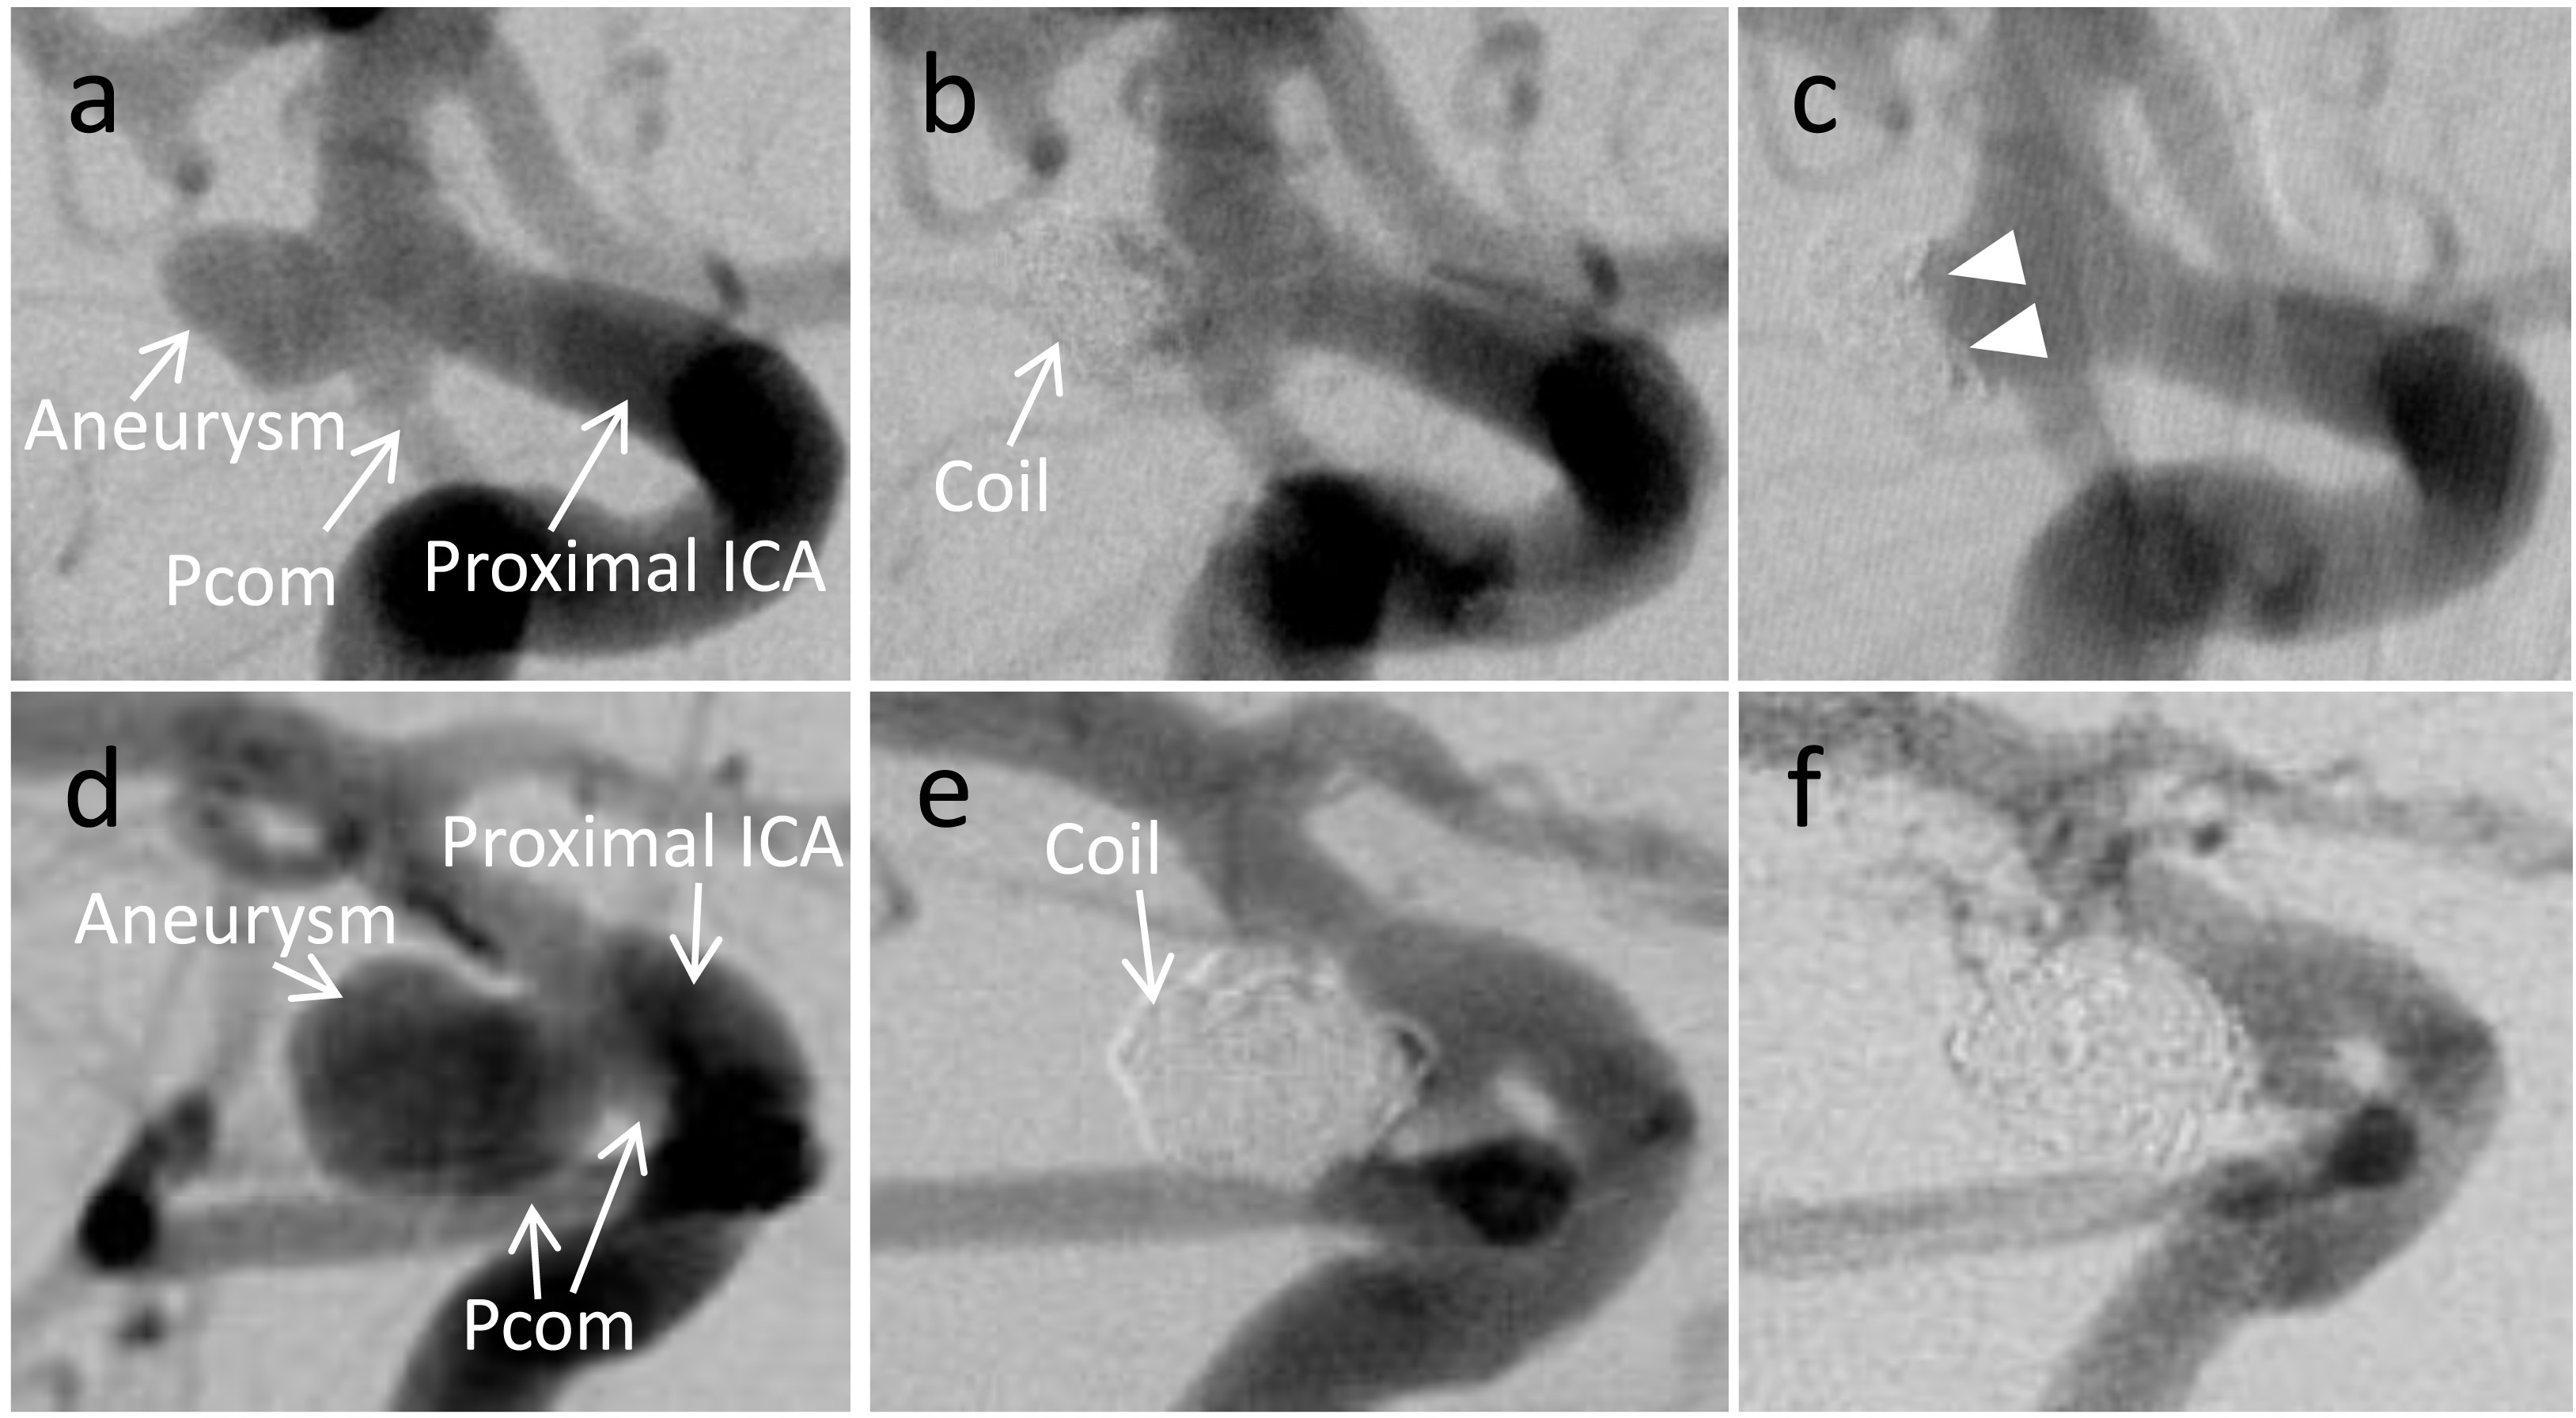 Representative cases. (a): Pretreatment right internal carotid artery (ICA) angiography, lateral view, shows an unruptured posterior communicating artery (Pcom) aneurysm. Velocity ratio and flow rate of the Pcom are 0.397 and 47.9 mL min-1, respectively. (b): Right ICA angiography immediately after endovascular treatment shows sufficient occlusion with a small neck remnant, and the volume embolization ratio is 25.0%. (c): Right ICA angiography 1 year after coil embolization reveals an obvious aneurysm recurrence due to coil compaction (arrowheads). (d): Right ICA angiography, right oblique view, before treatment demonstrates an unruptured Pcom aneurysm with abundant Pcom flow. Velocity ratio and flow rate of the Pcom are 0.793 and 111.8 mL min-1, respectively. (e): Post-treatment right ICA angiography shows the occluded aneurysm with a volume embolization ratio of 24.2%. (f): ICA angiography 1 year after treatment reveals no aneurysm recurrence. 